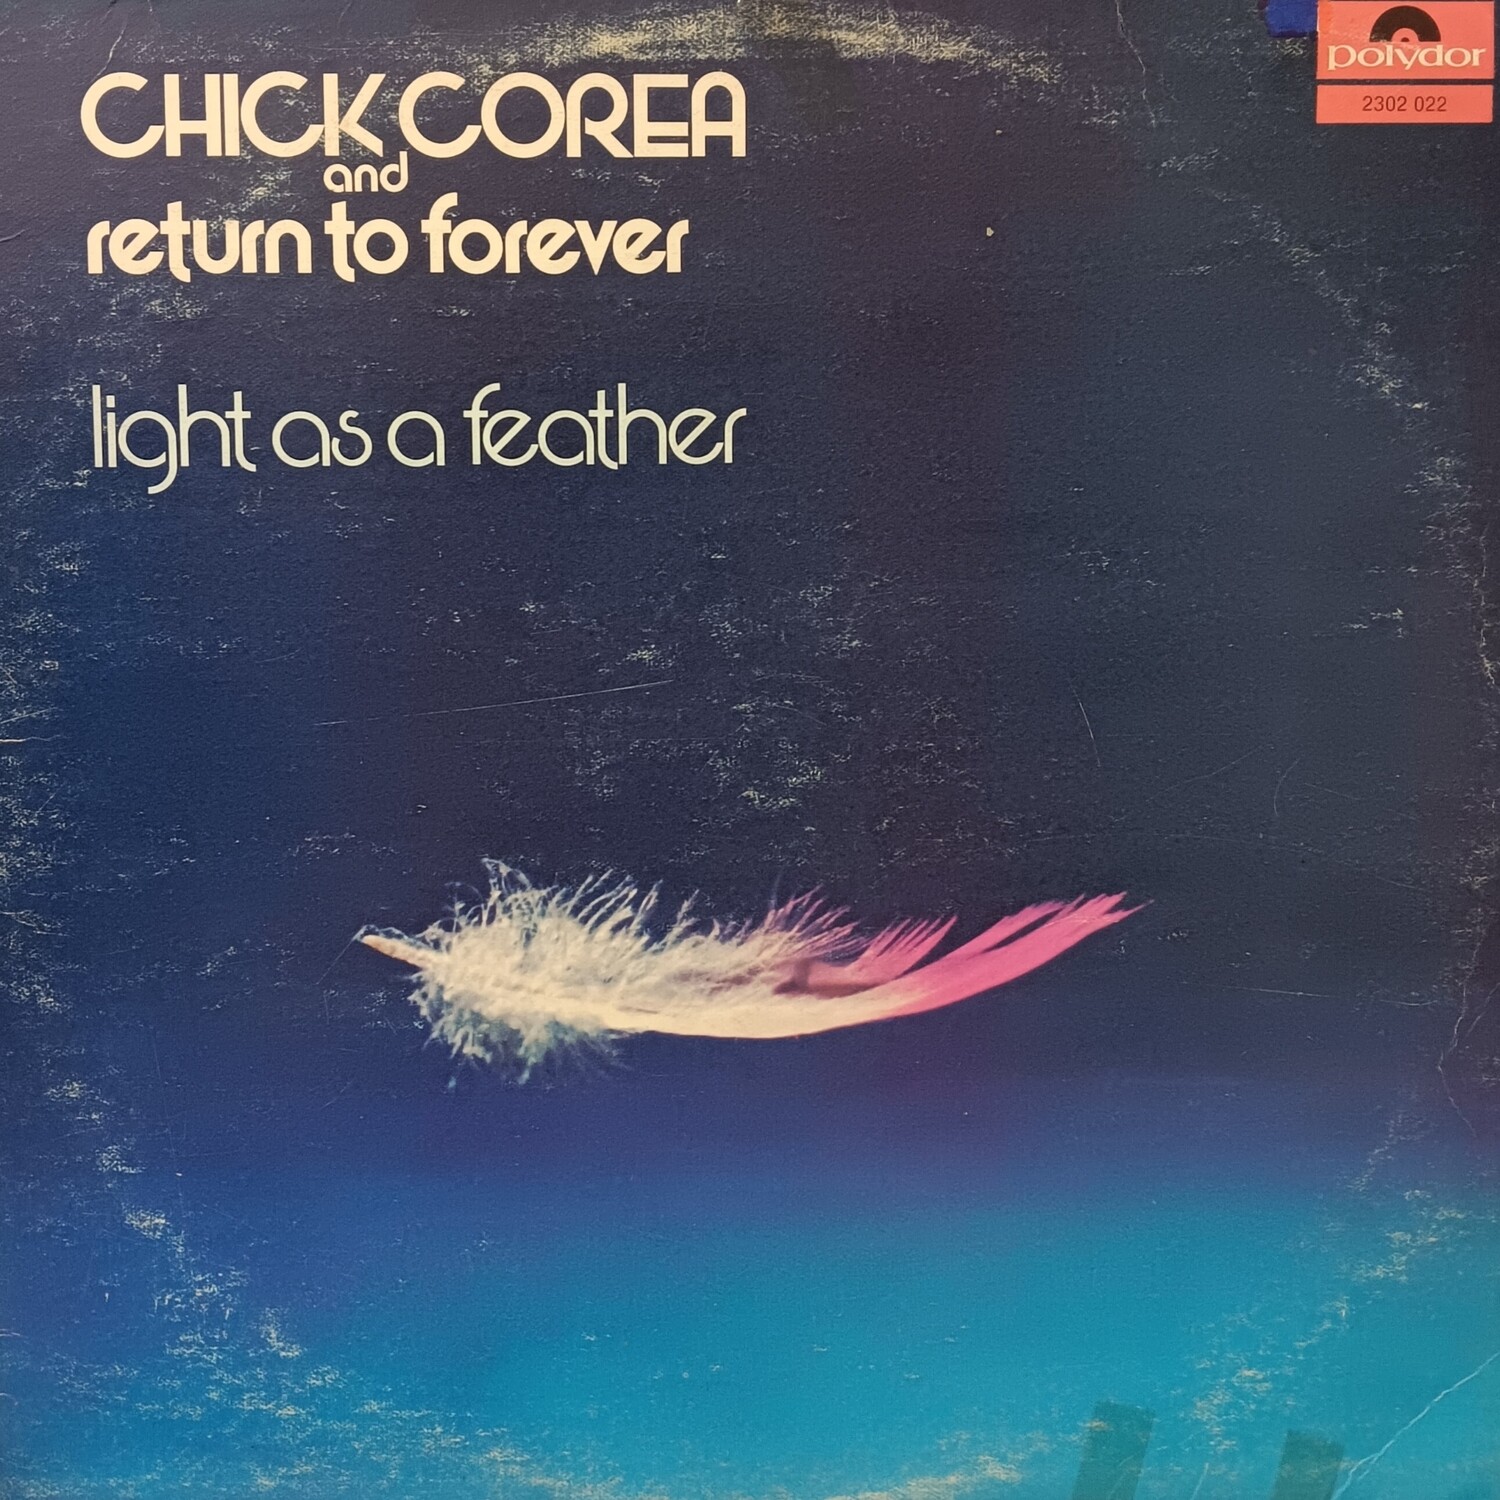 CHICK COREA AND RETURN TO FOREVER - Light as a feather